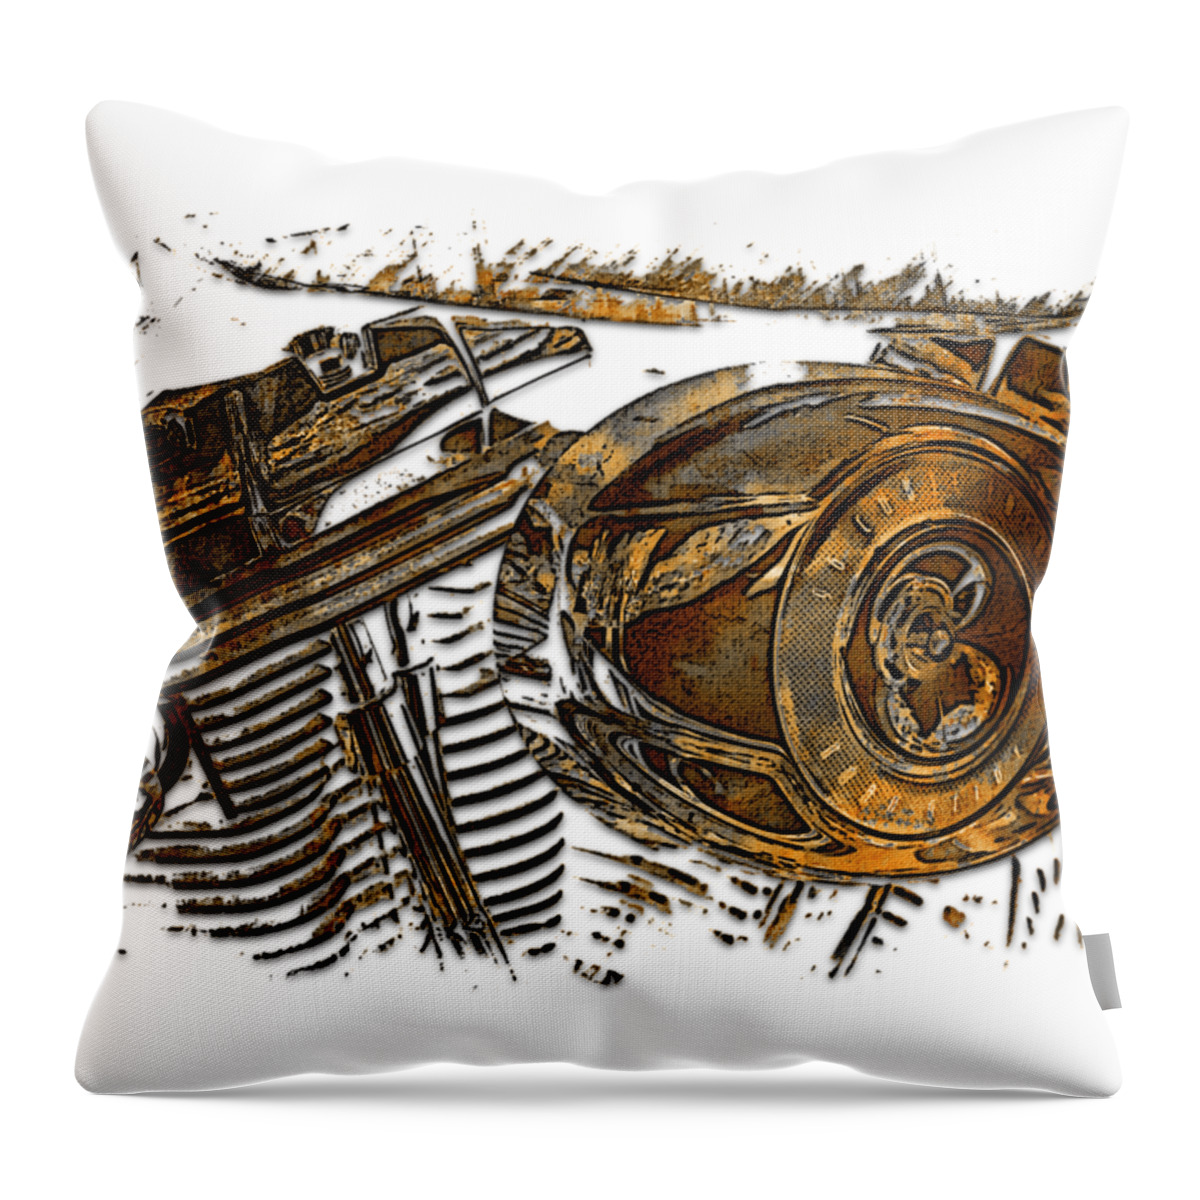 Earthy Throw Pillow featuring the photograph 2007 Harley C 01 Earthy 3 Dimensional by DiDesigns Graphics